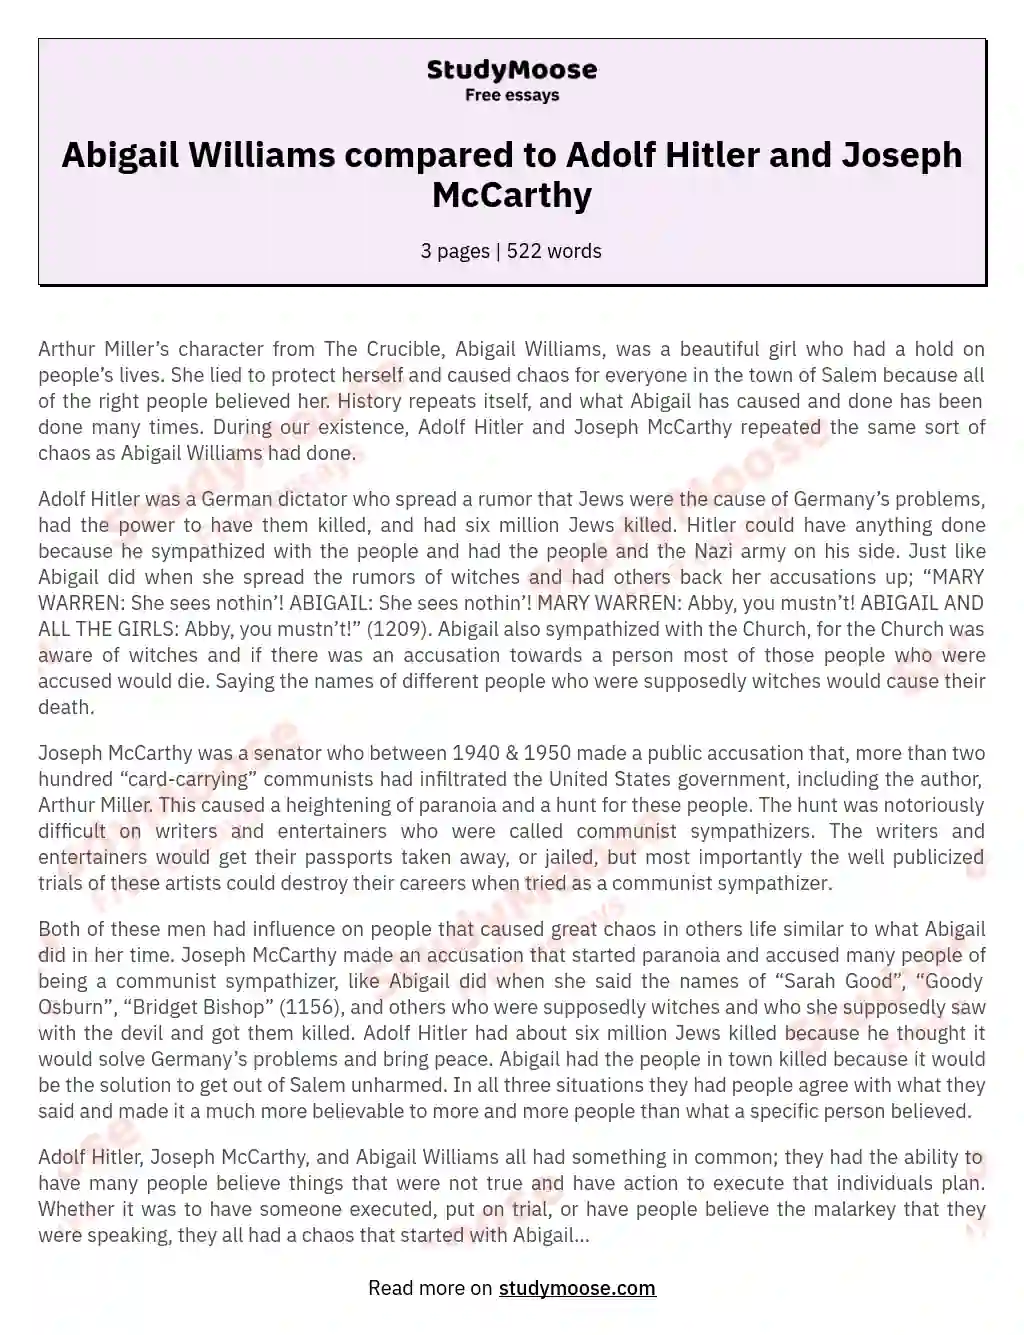 Abigail Williams compared to Adolf Hitler and Joseph McCarthy